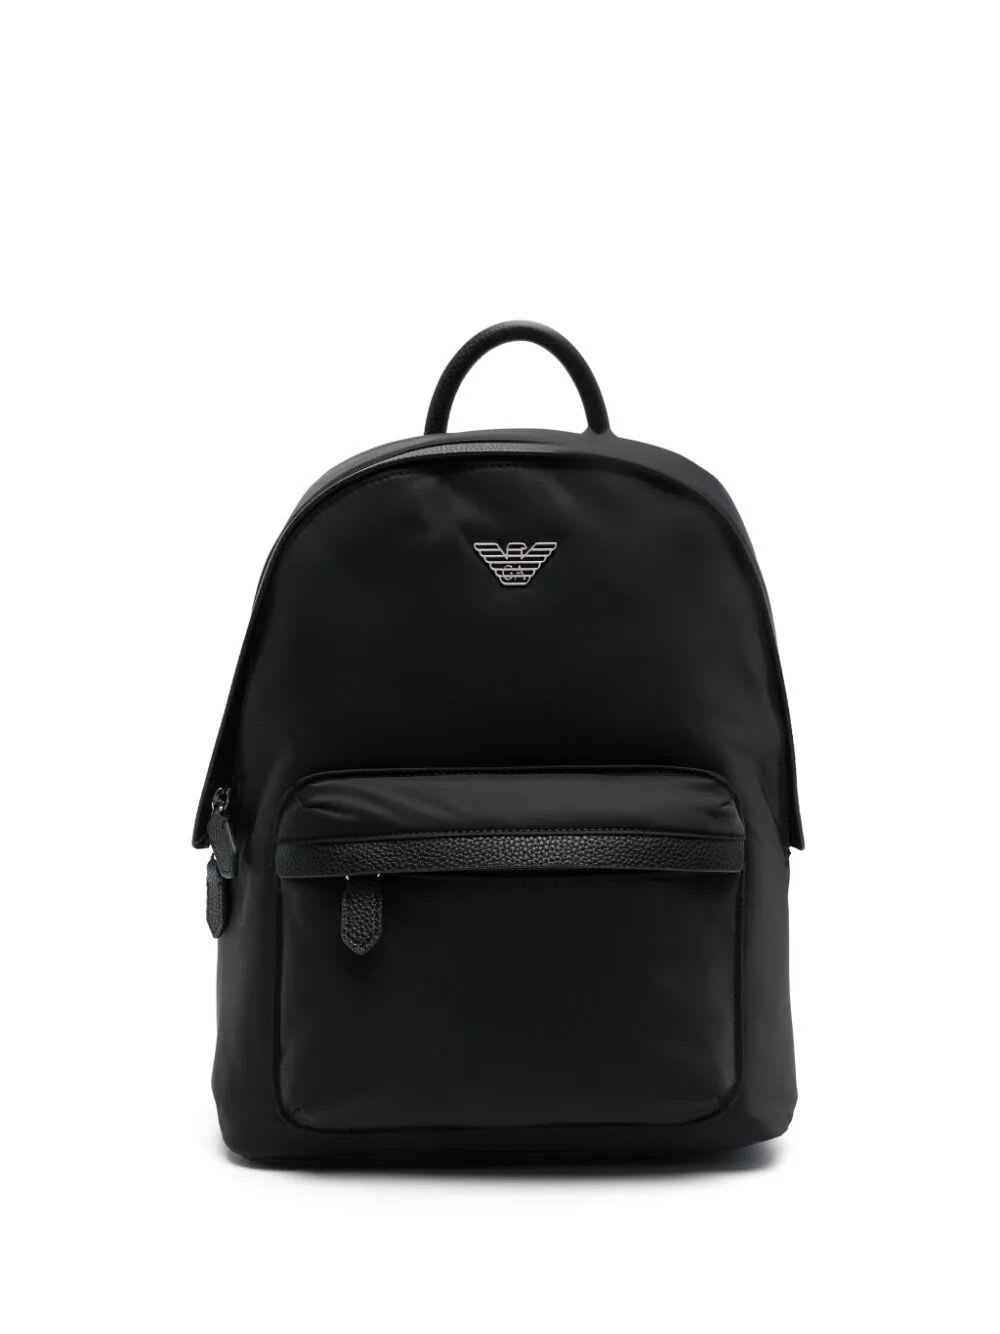 Emporio Armani Travel Essentials Recycled Nylon Backpack In Black